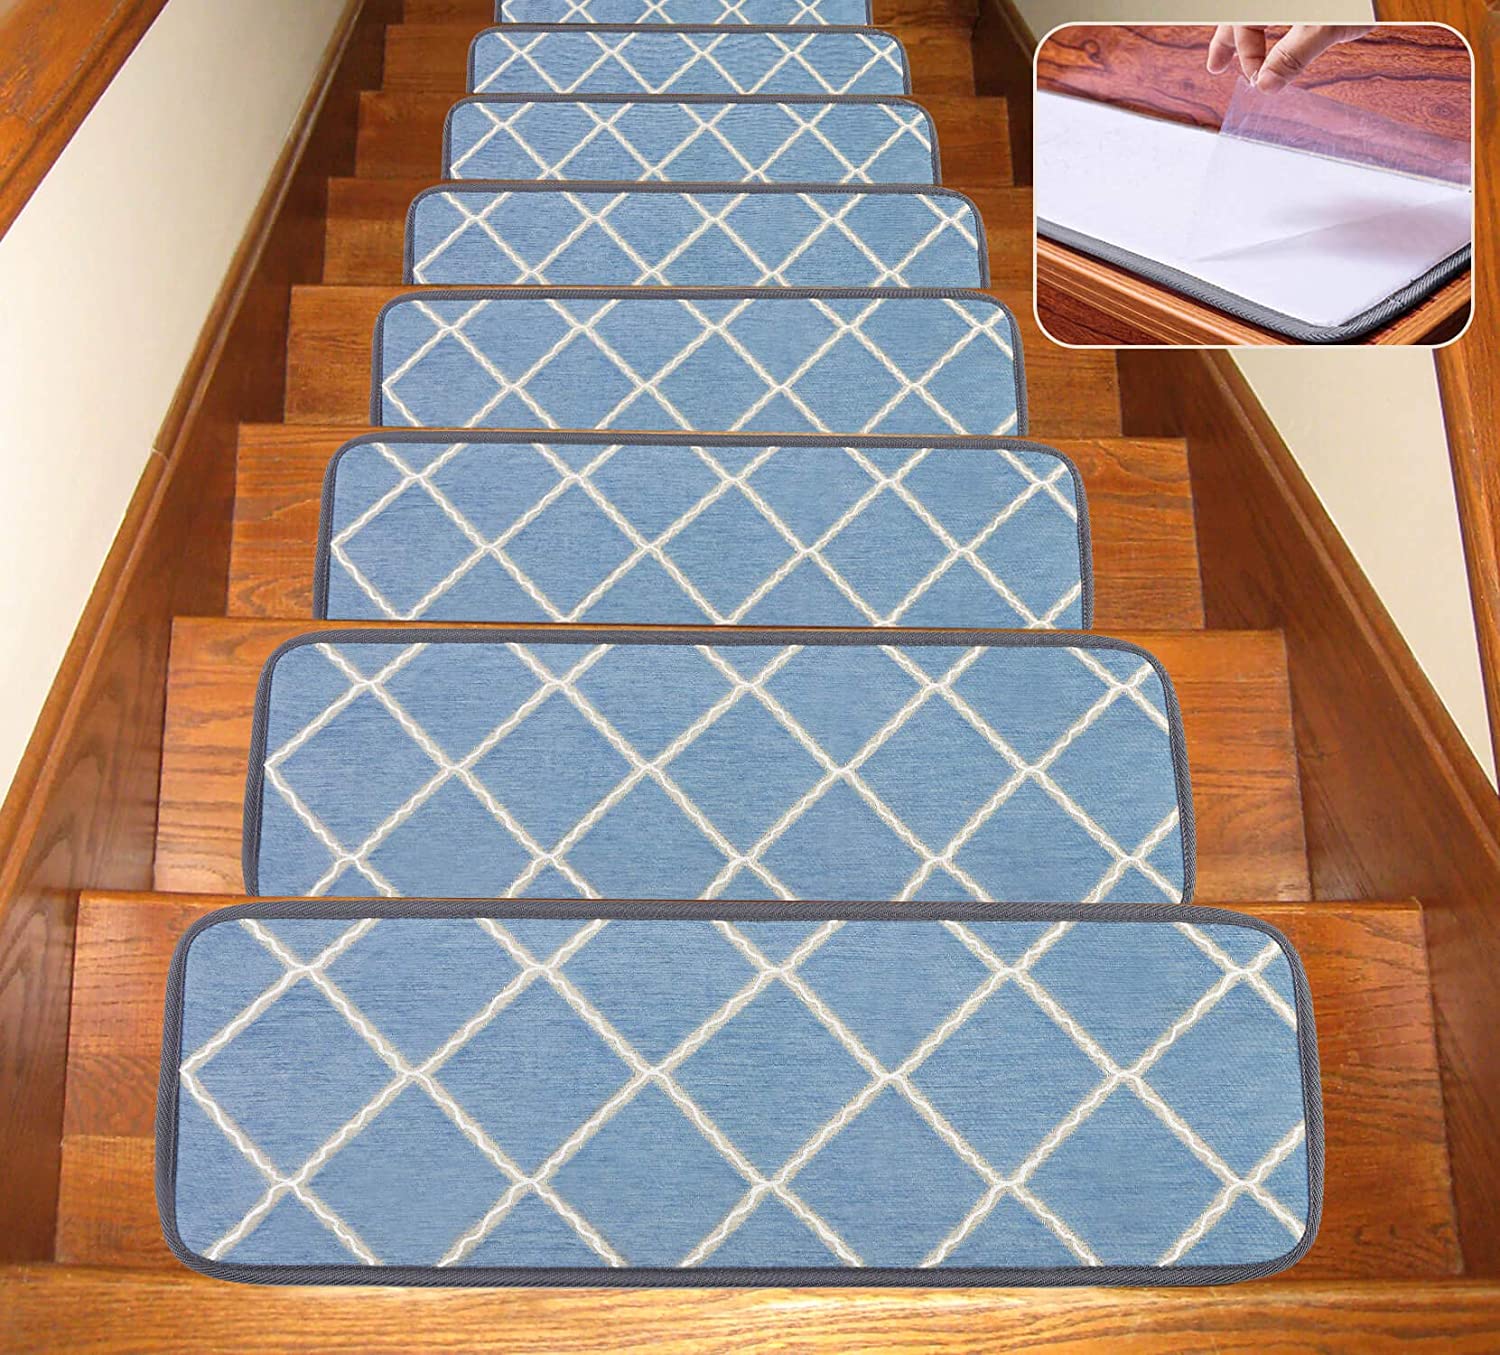 Seloom Blue Non-Slip Stair Treads Carpet with Skid Resistant Rubber Backing and Modern Moroccan Diamond Trellis Design for Indoor Wooden Steps(36x36 Inch, 1Piece, Dusk Blue)